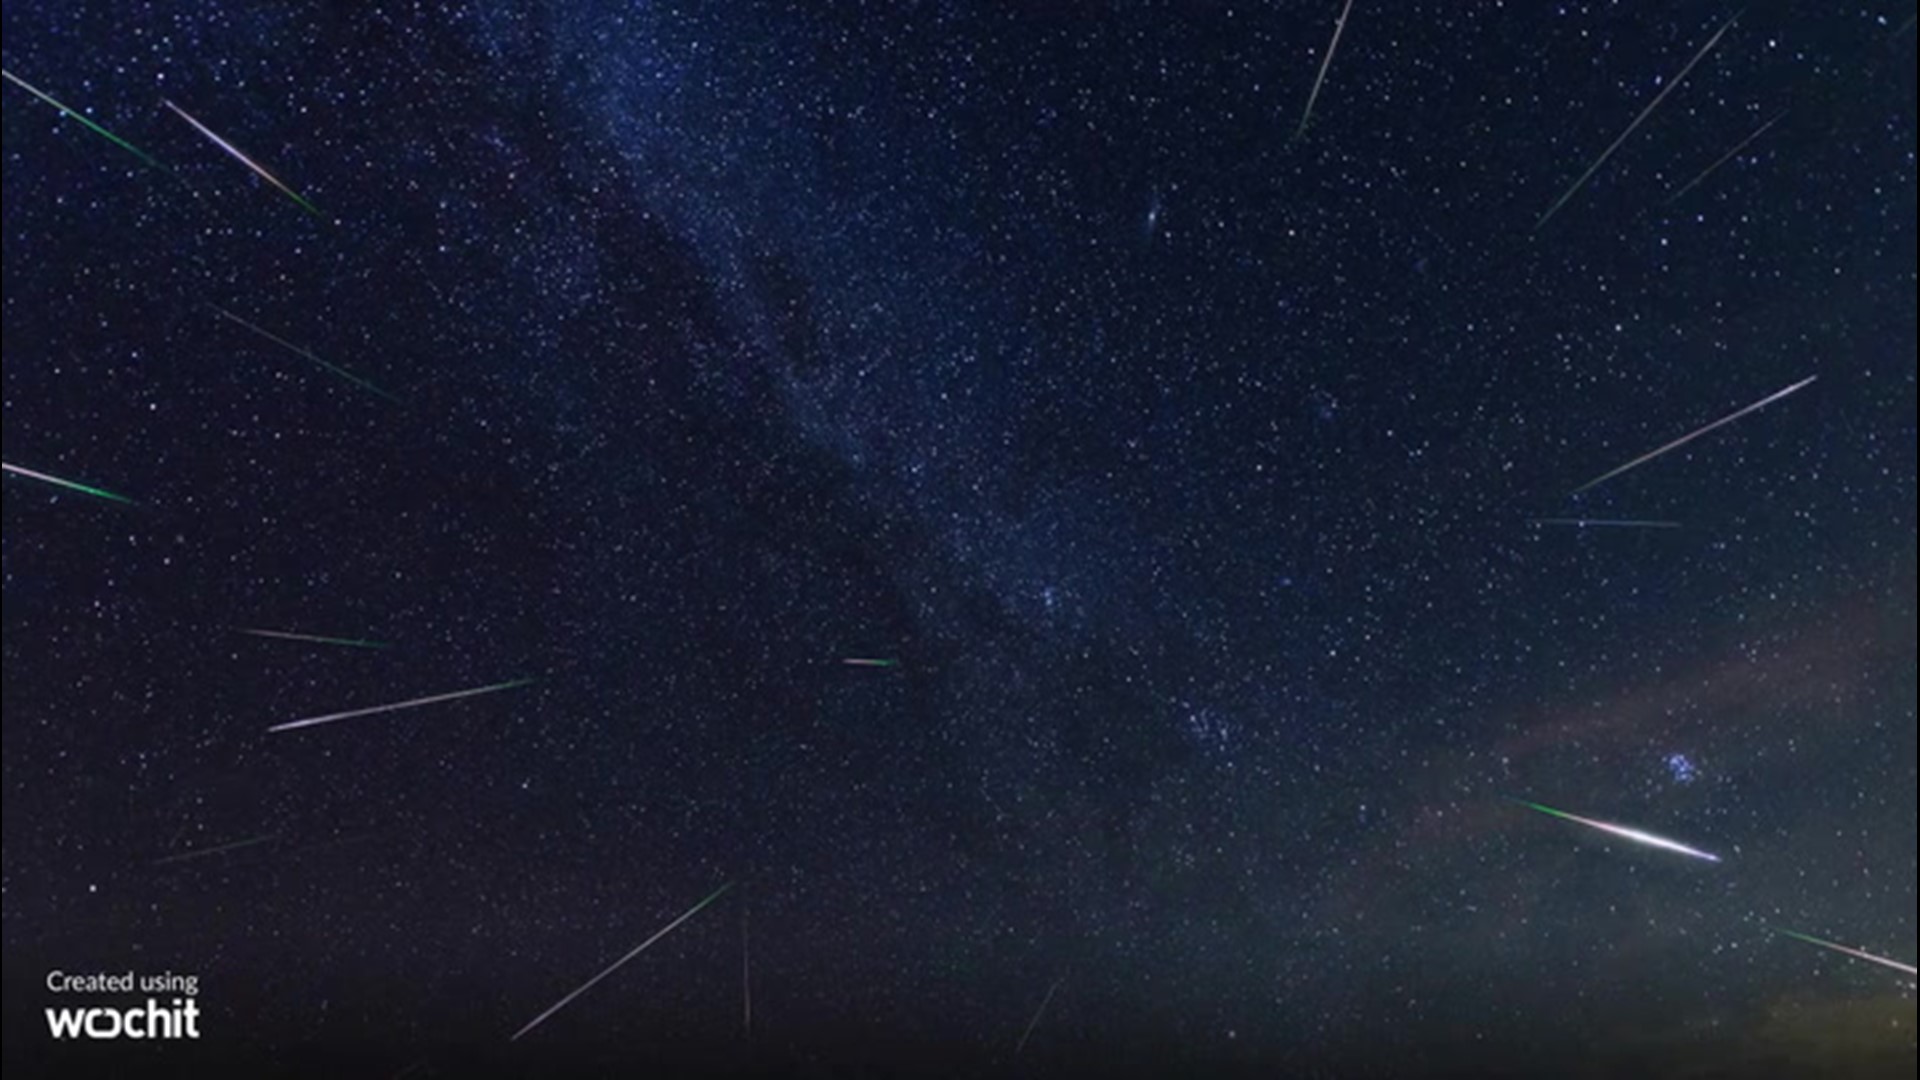 Looking for something cool to see during the weekend? Head outside at night and catch the peak of the Leonid meteor shower. Here's what to know about the shower.